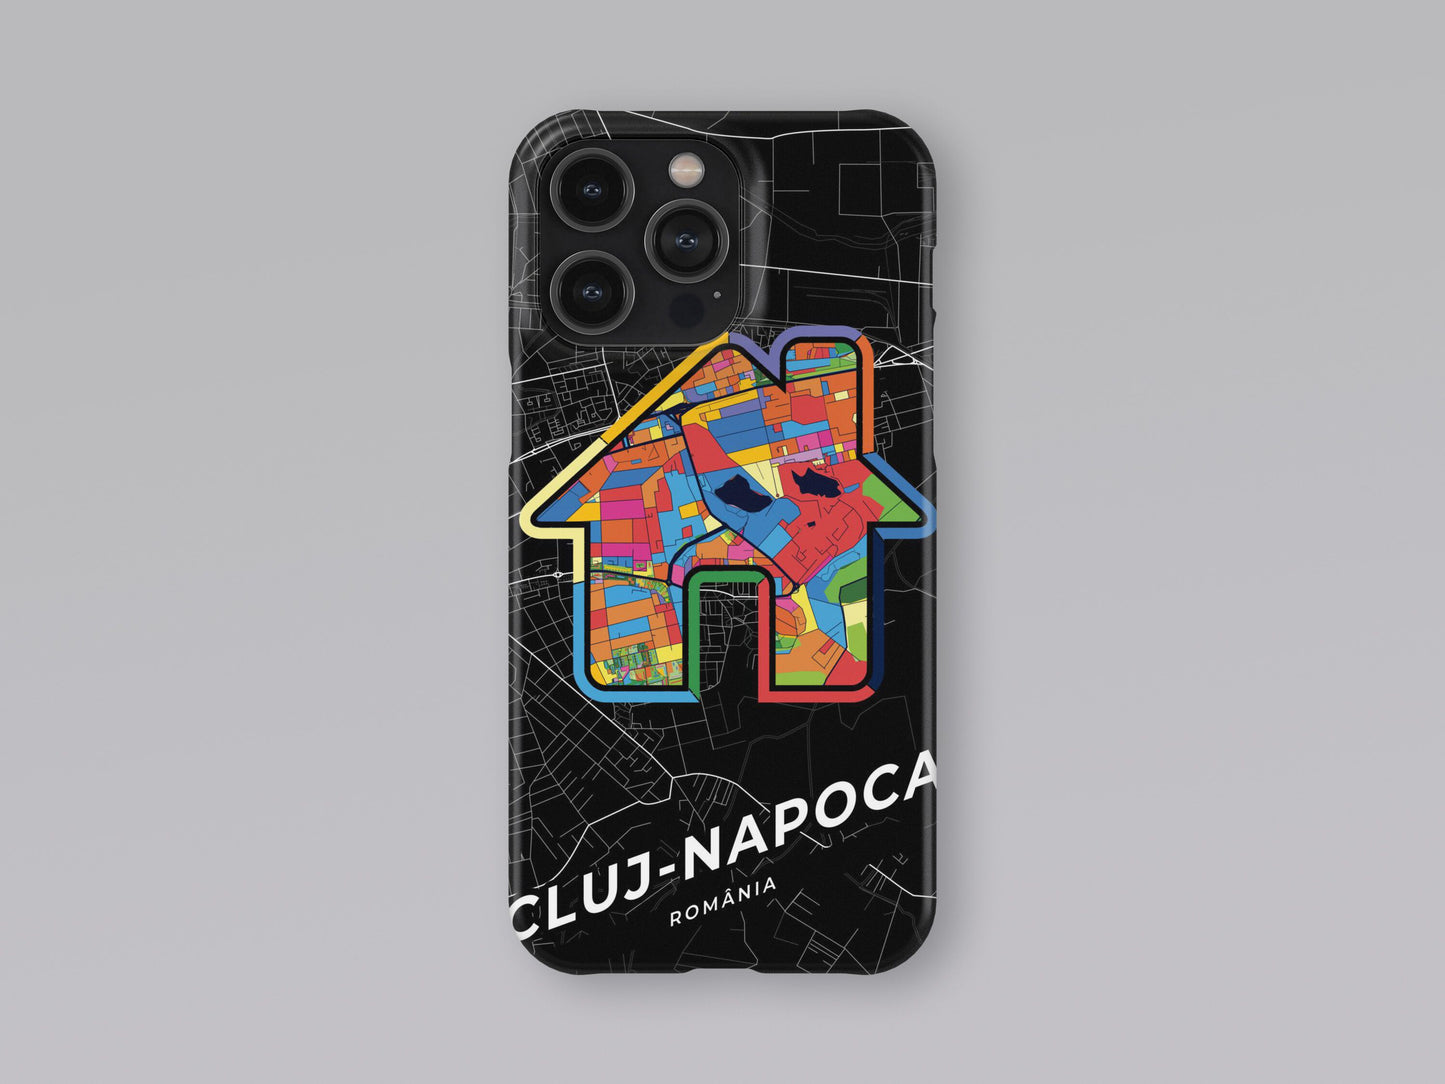 Cluj-Napoca Romania slim phone case with colorful icon. Birthday, wedding or housewarming gift. Couple match cases. 3